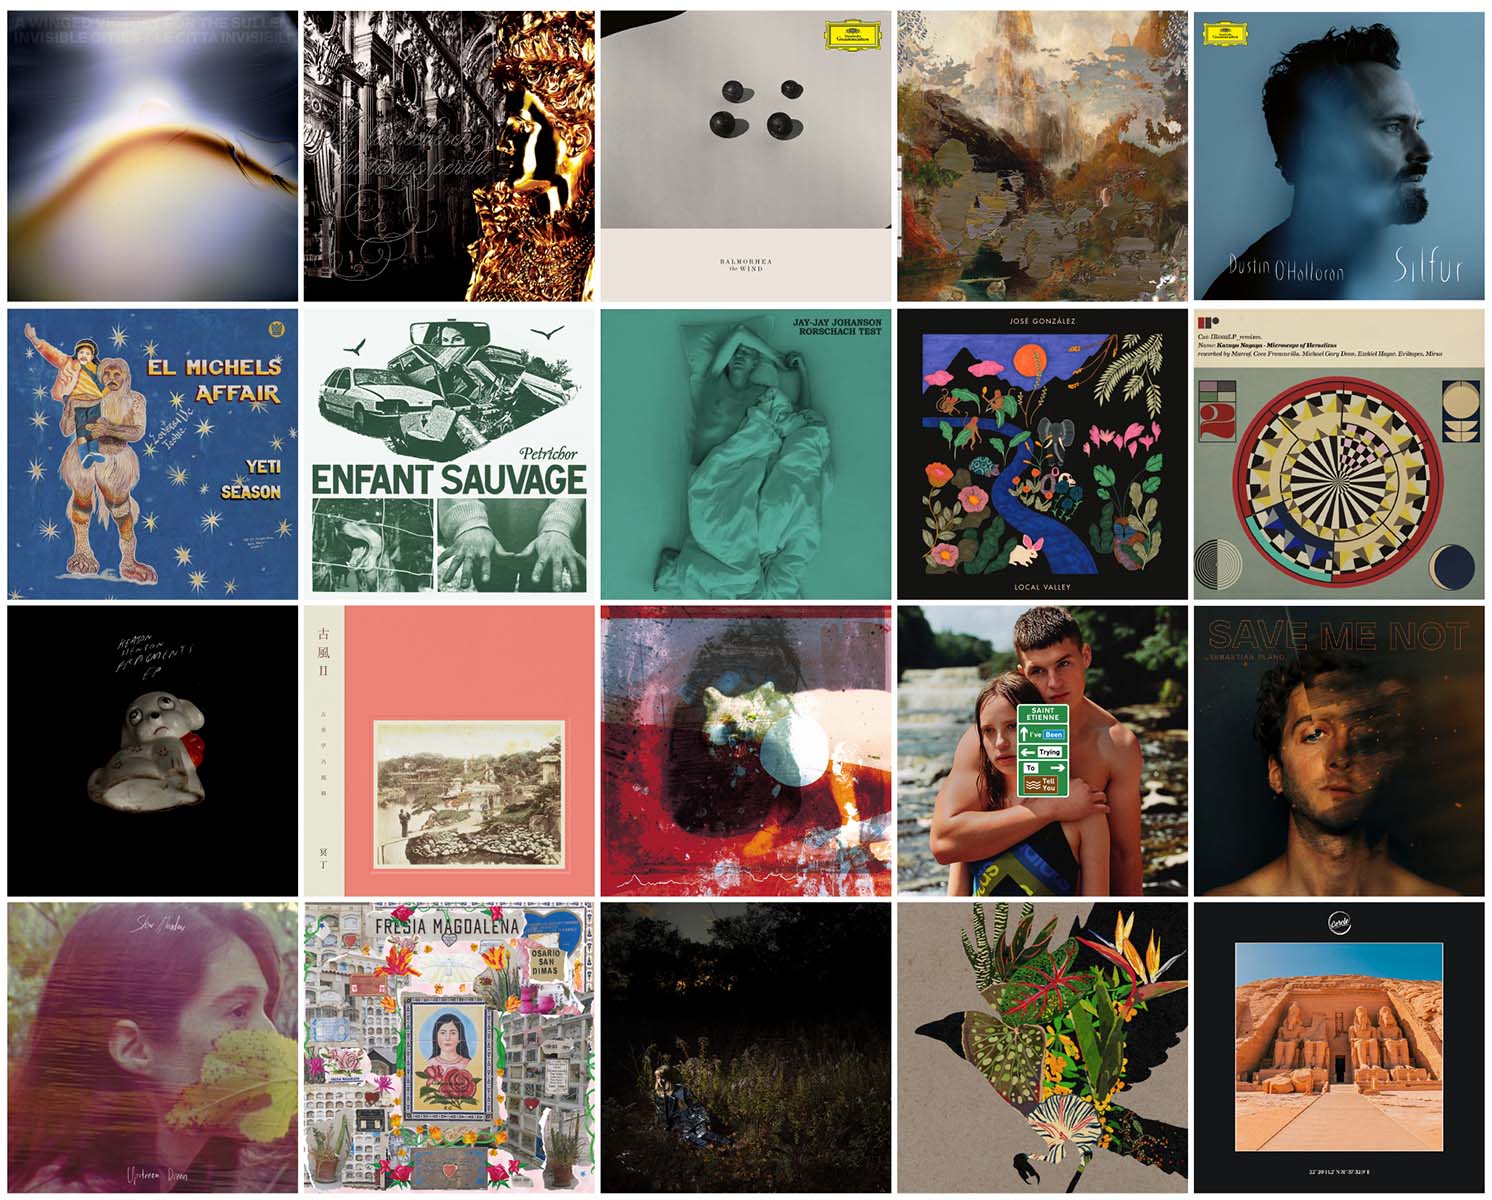 The covers of my top 20 albums of 2021 arranged in a grid